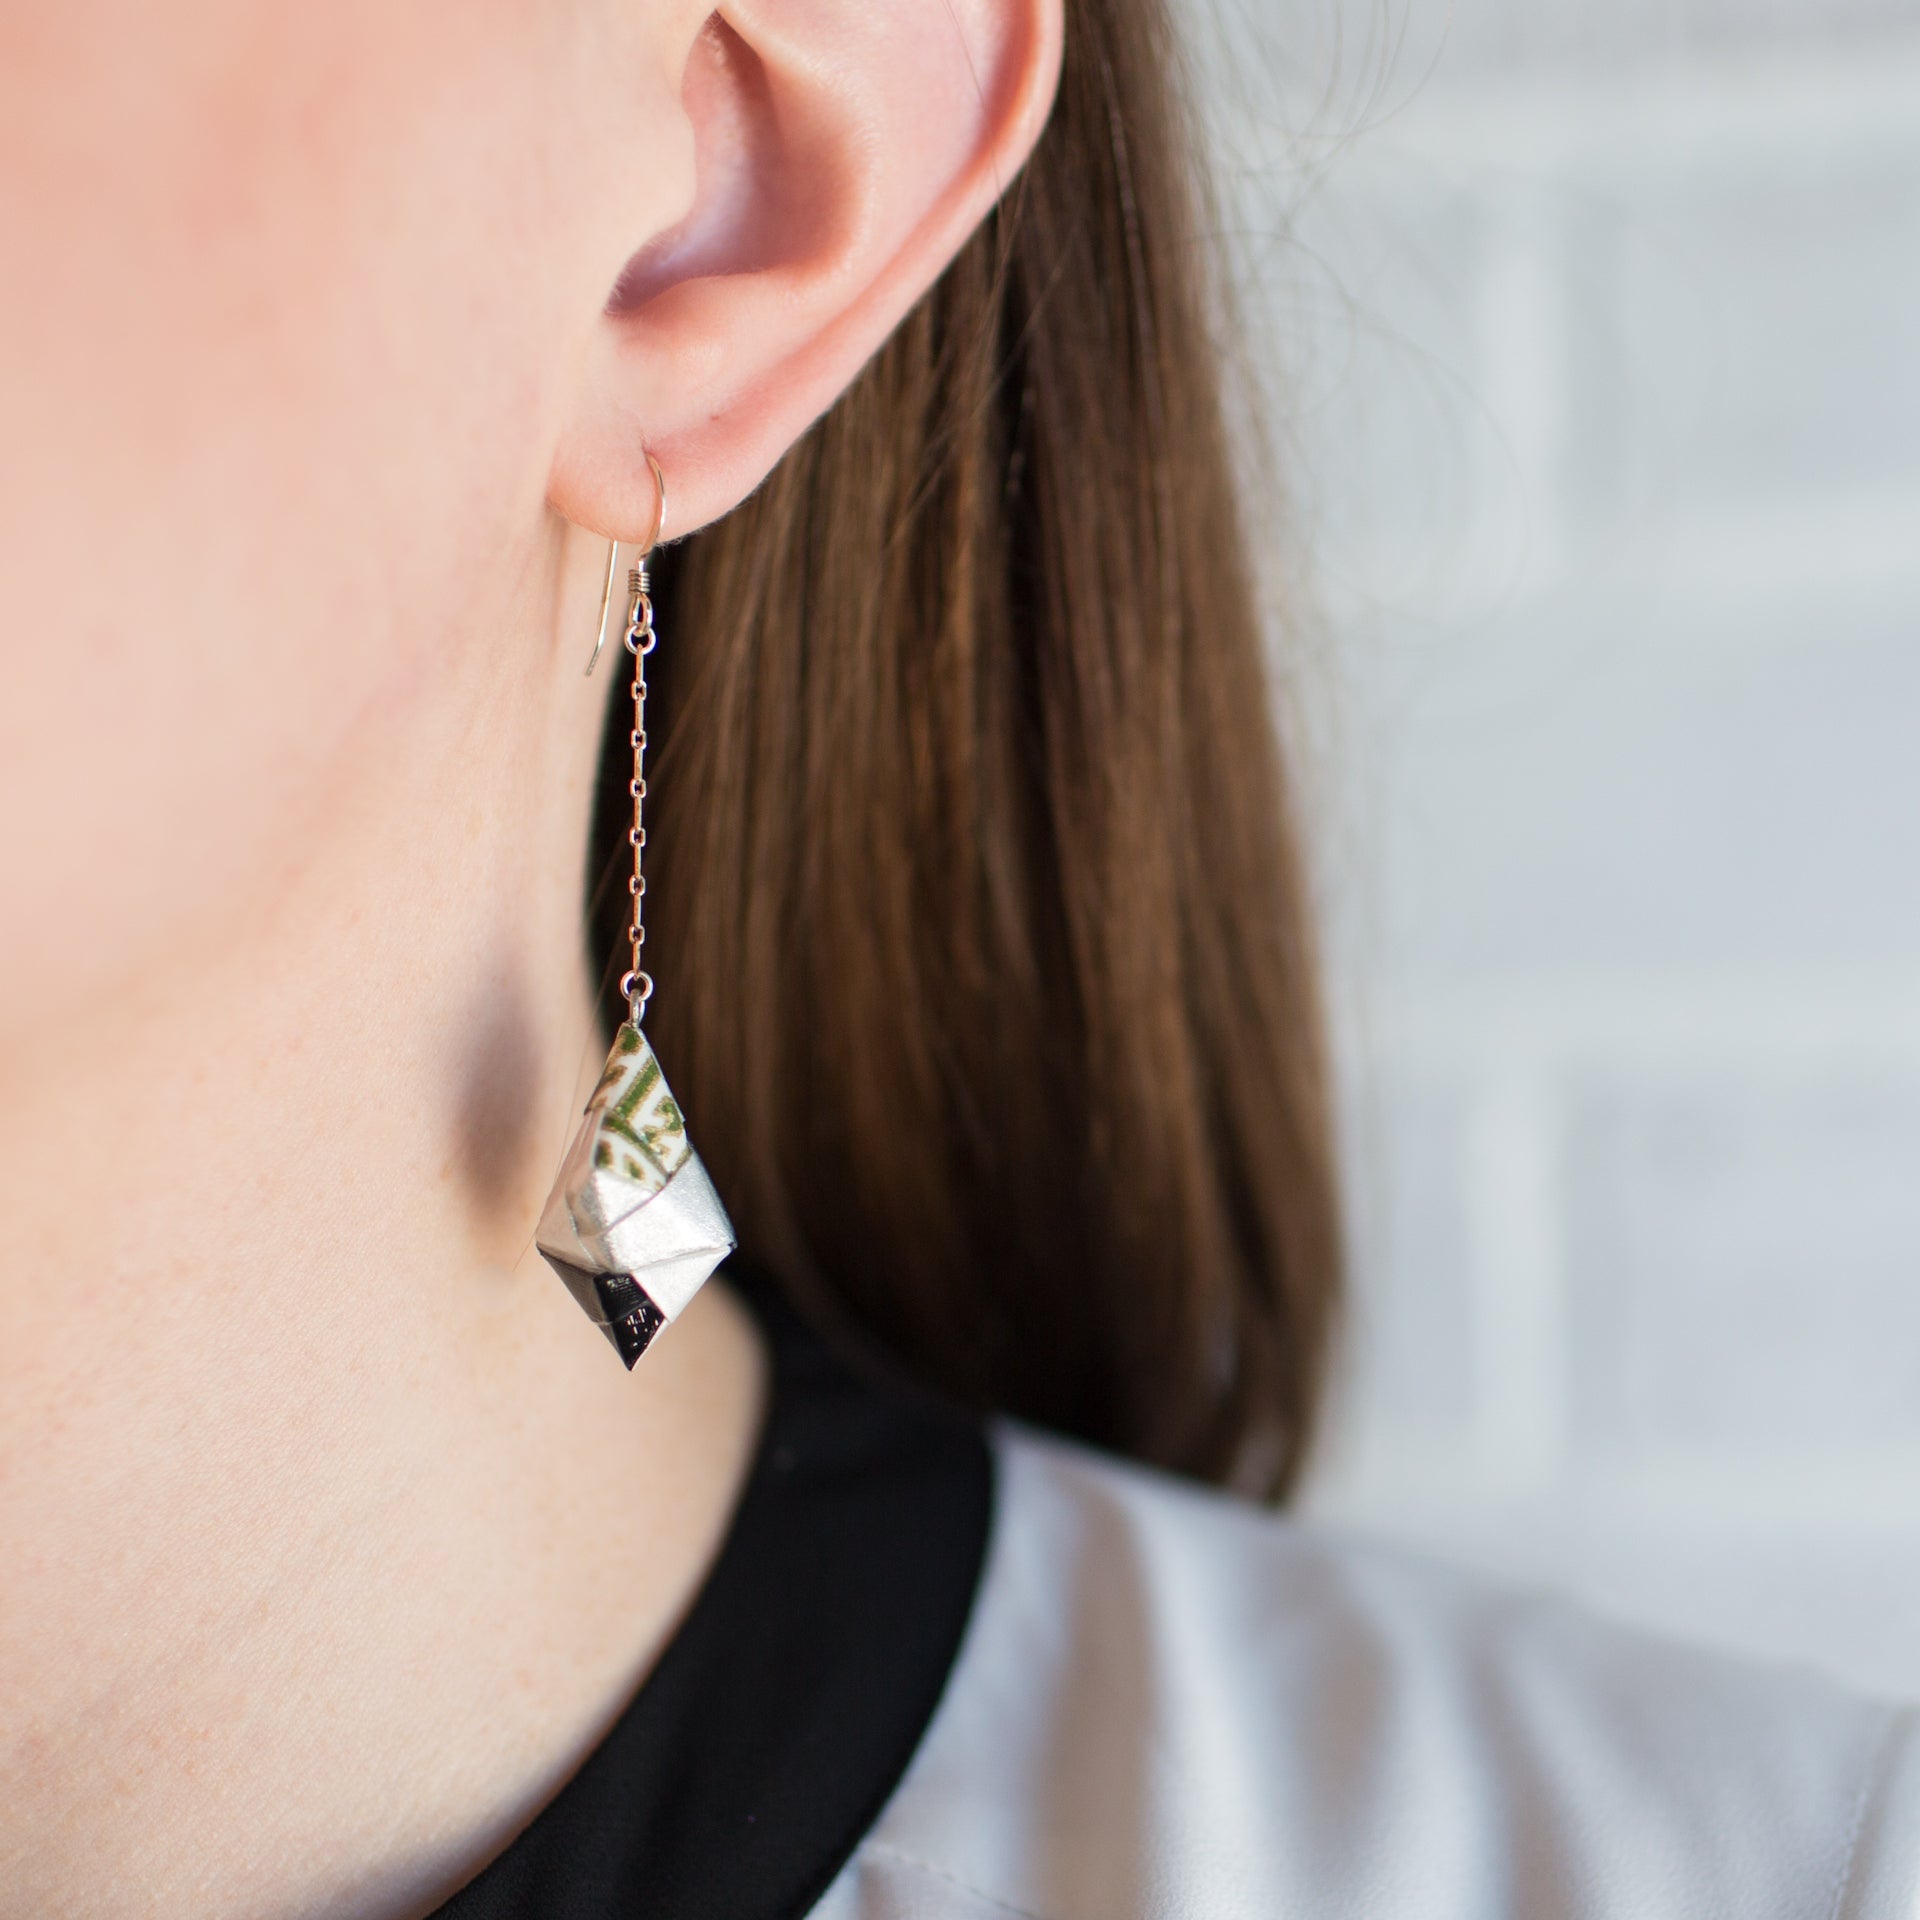 Origami Diamond Paper Earrings - Black Silver White Olive Green - By LeeMo Designs in Bend, Oregon